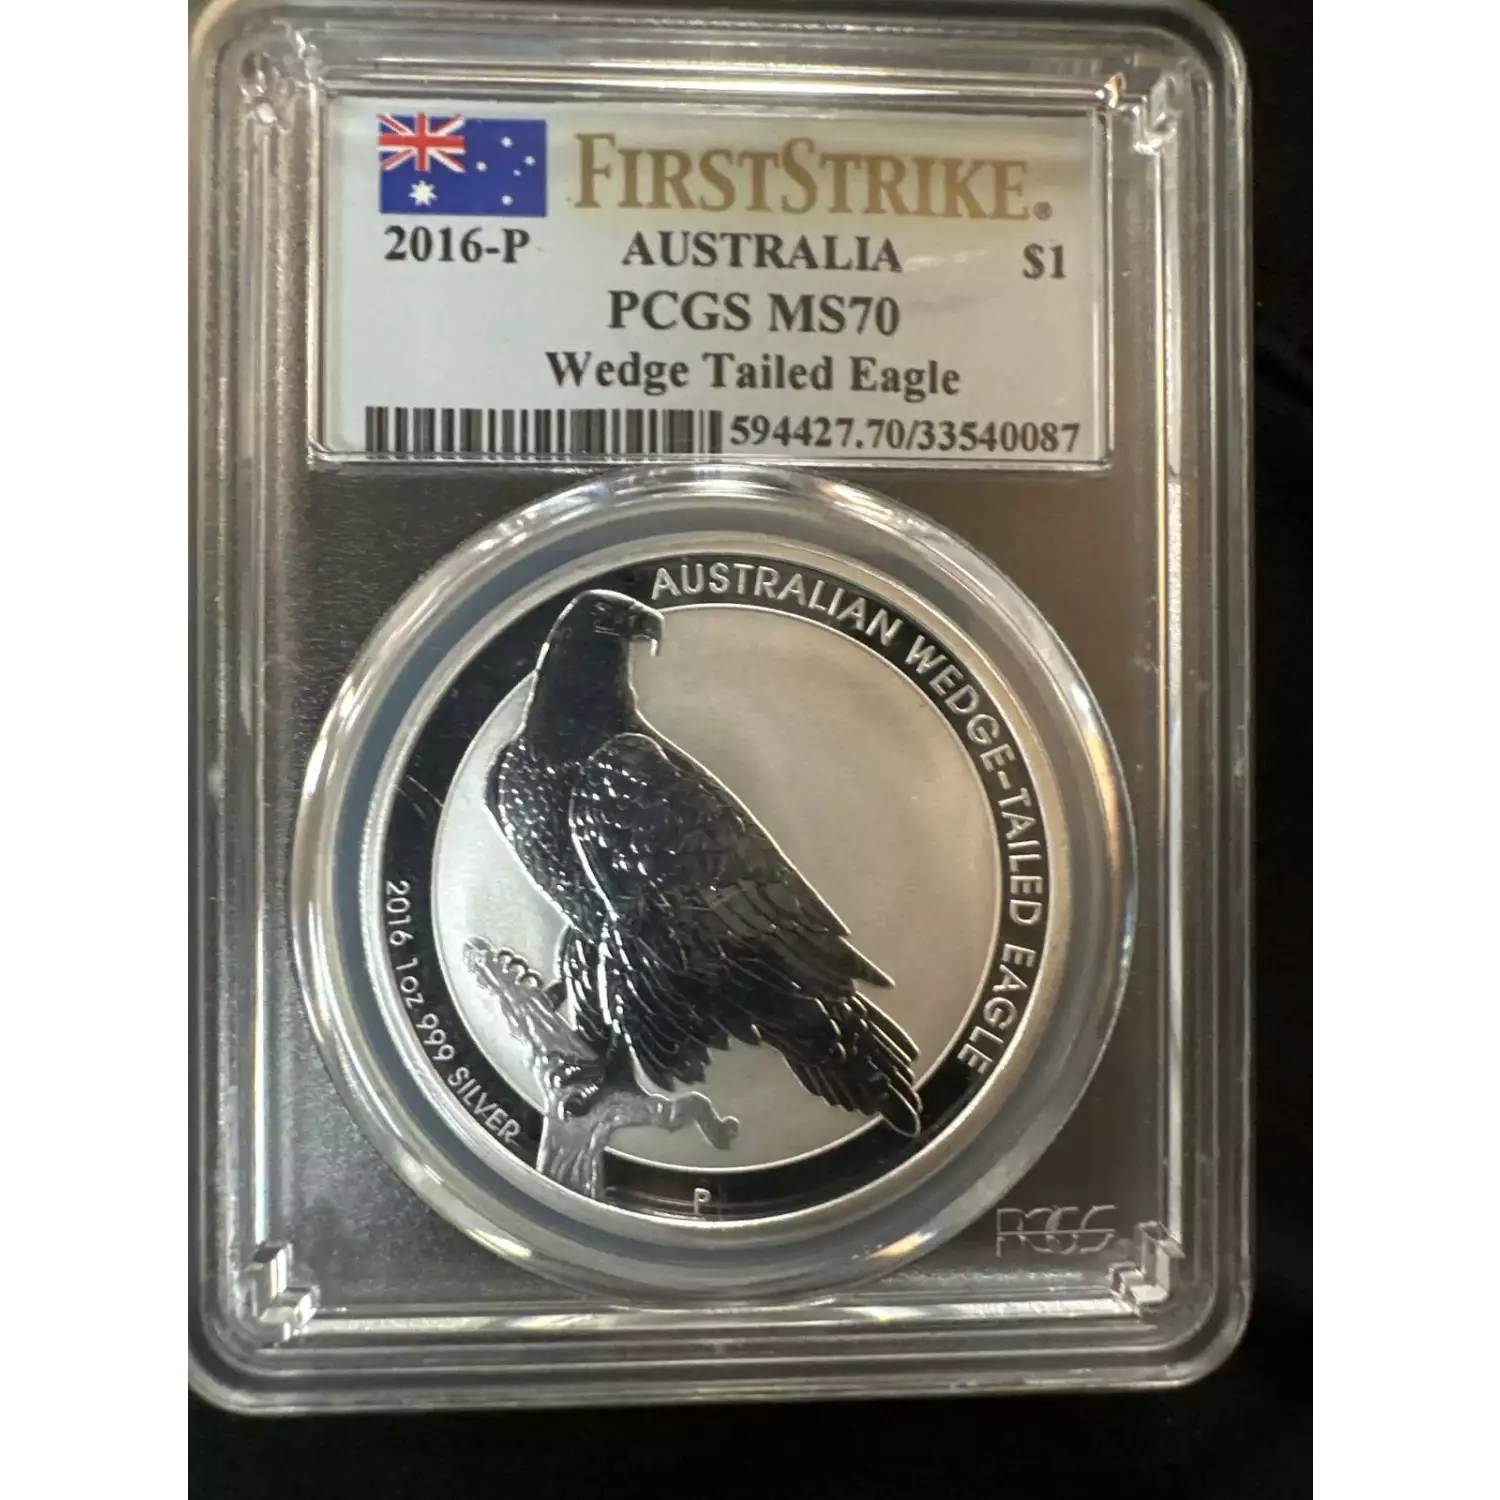 2016-P $1 Wedge Tailed Eagle First Strike